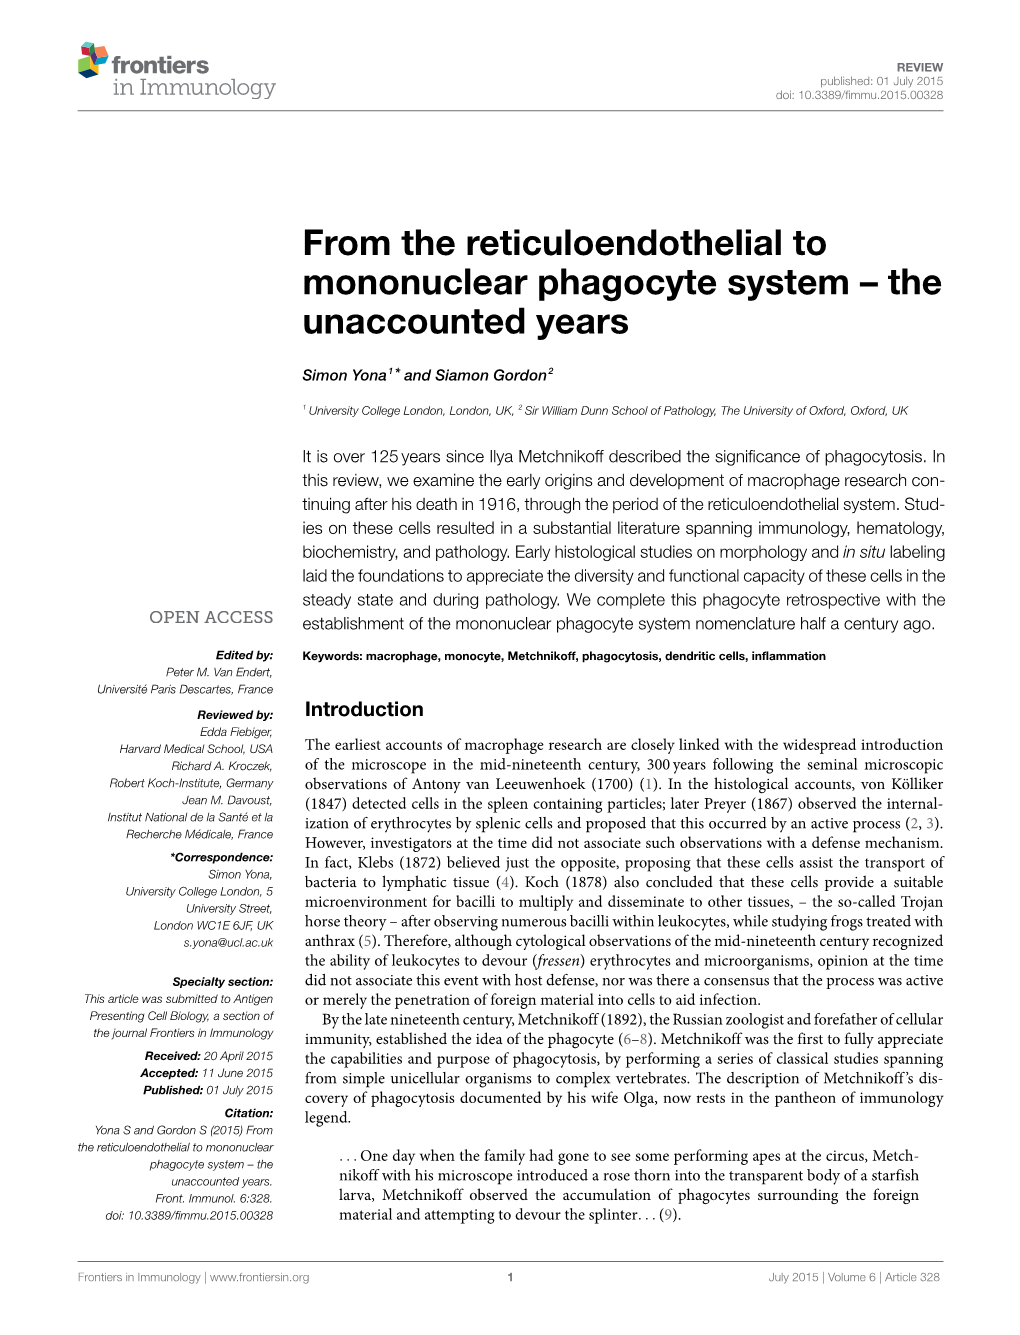 From the Reticuloendothelial to Mononuclear Phagocyte System – the Unaccounted Years